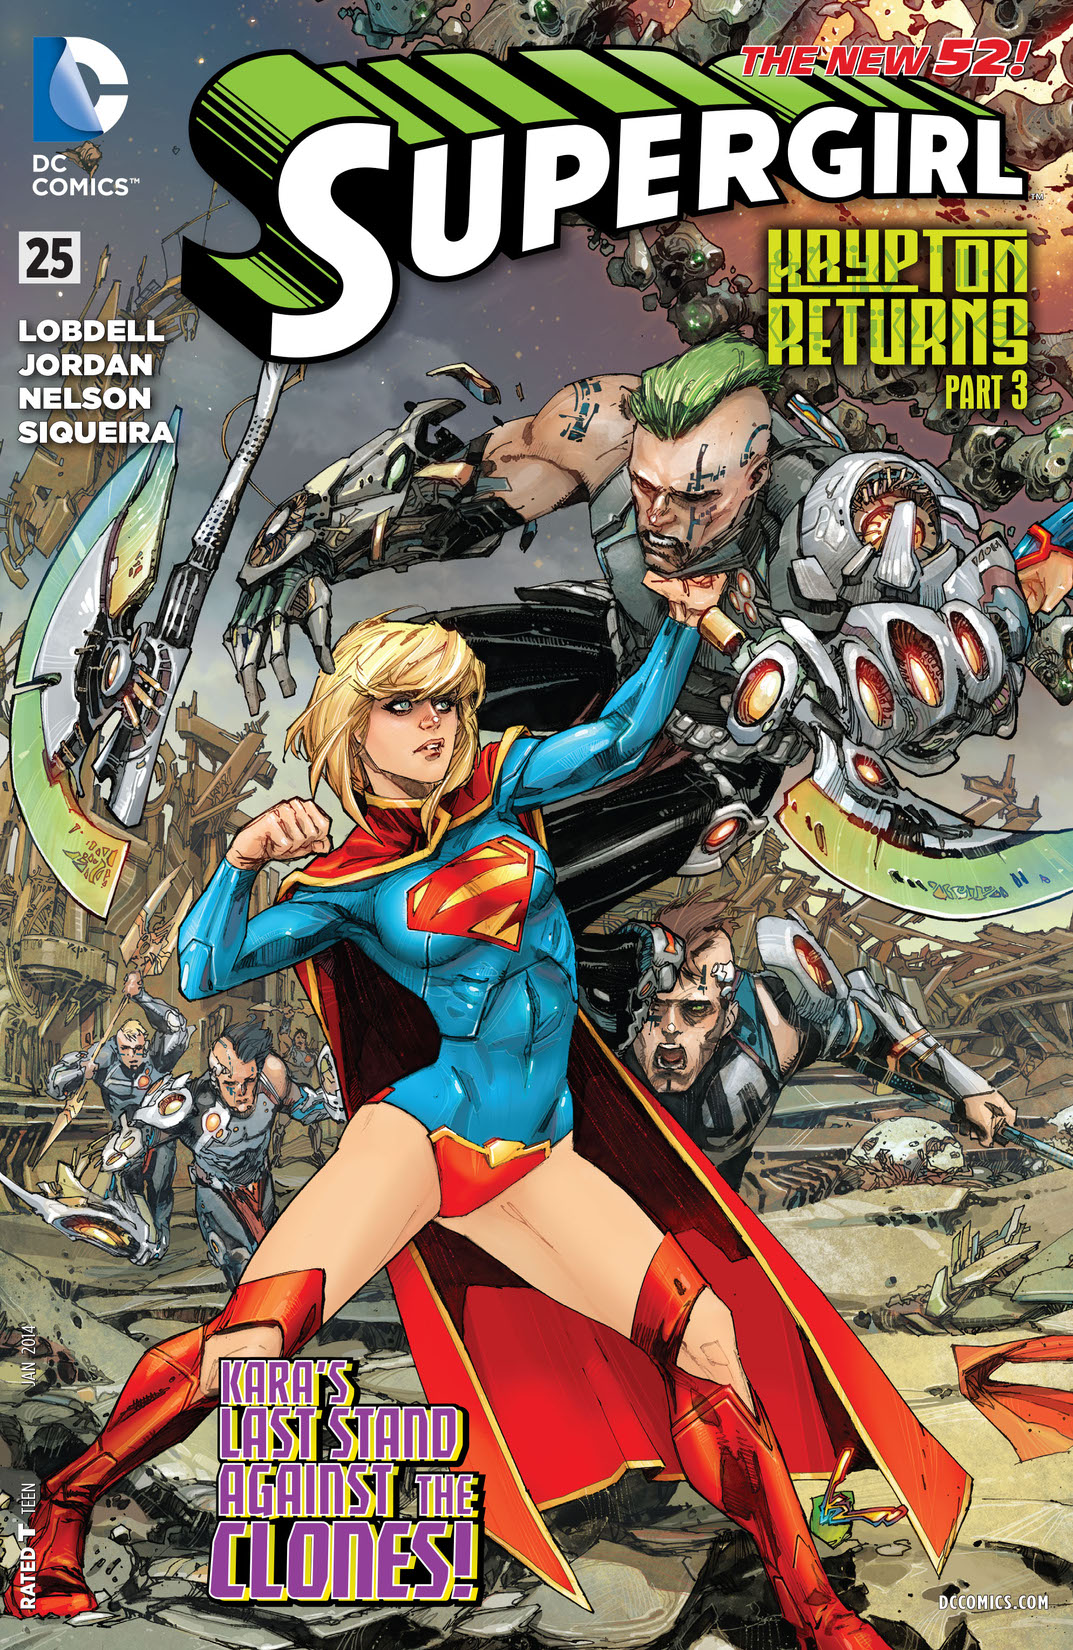 Supergirl (2011-) #25 preview images